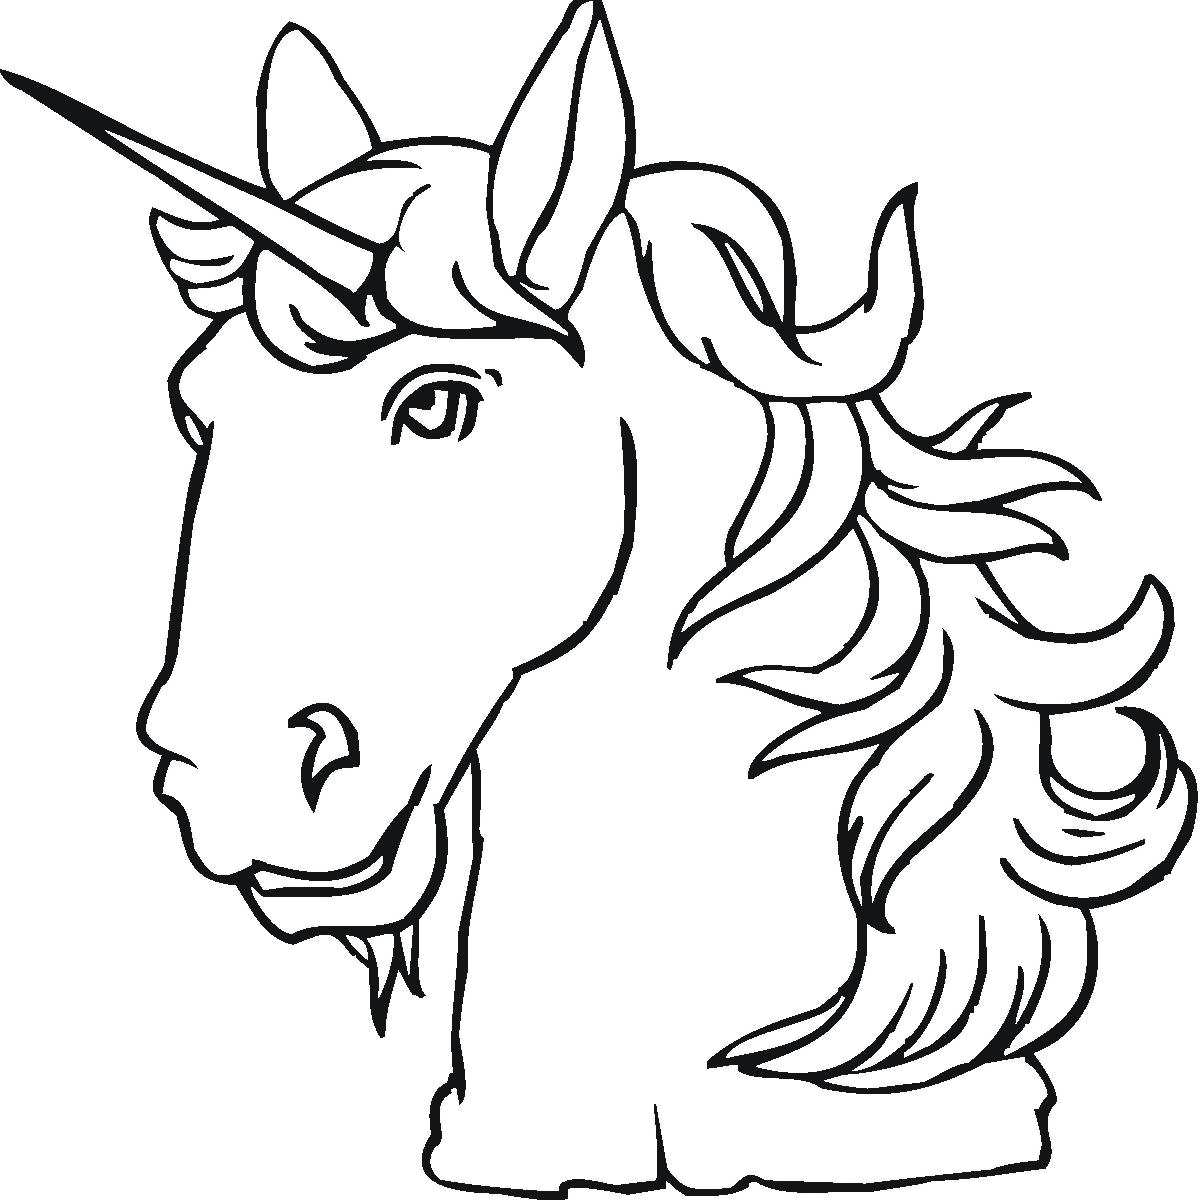 Unicorn Outline | Free download on ClipArtMag